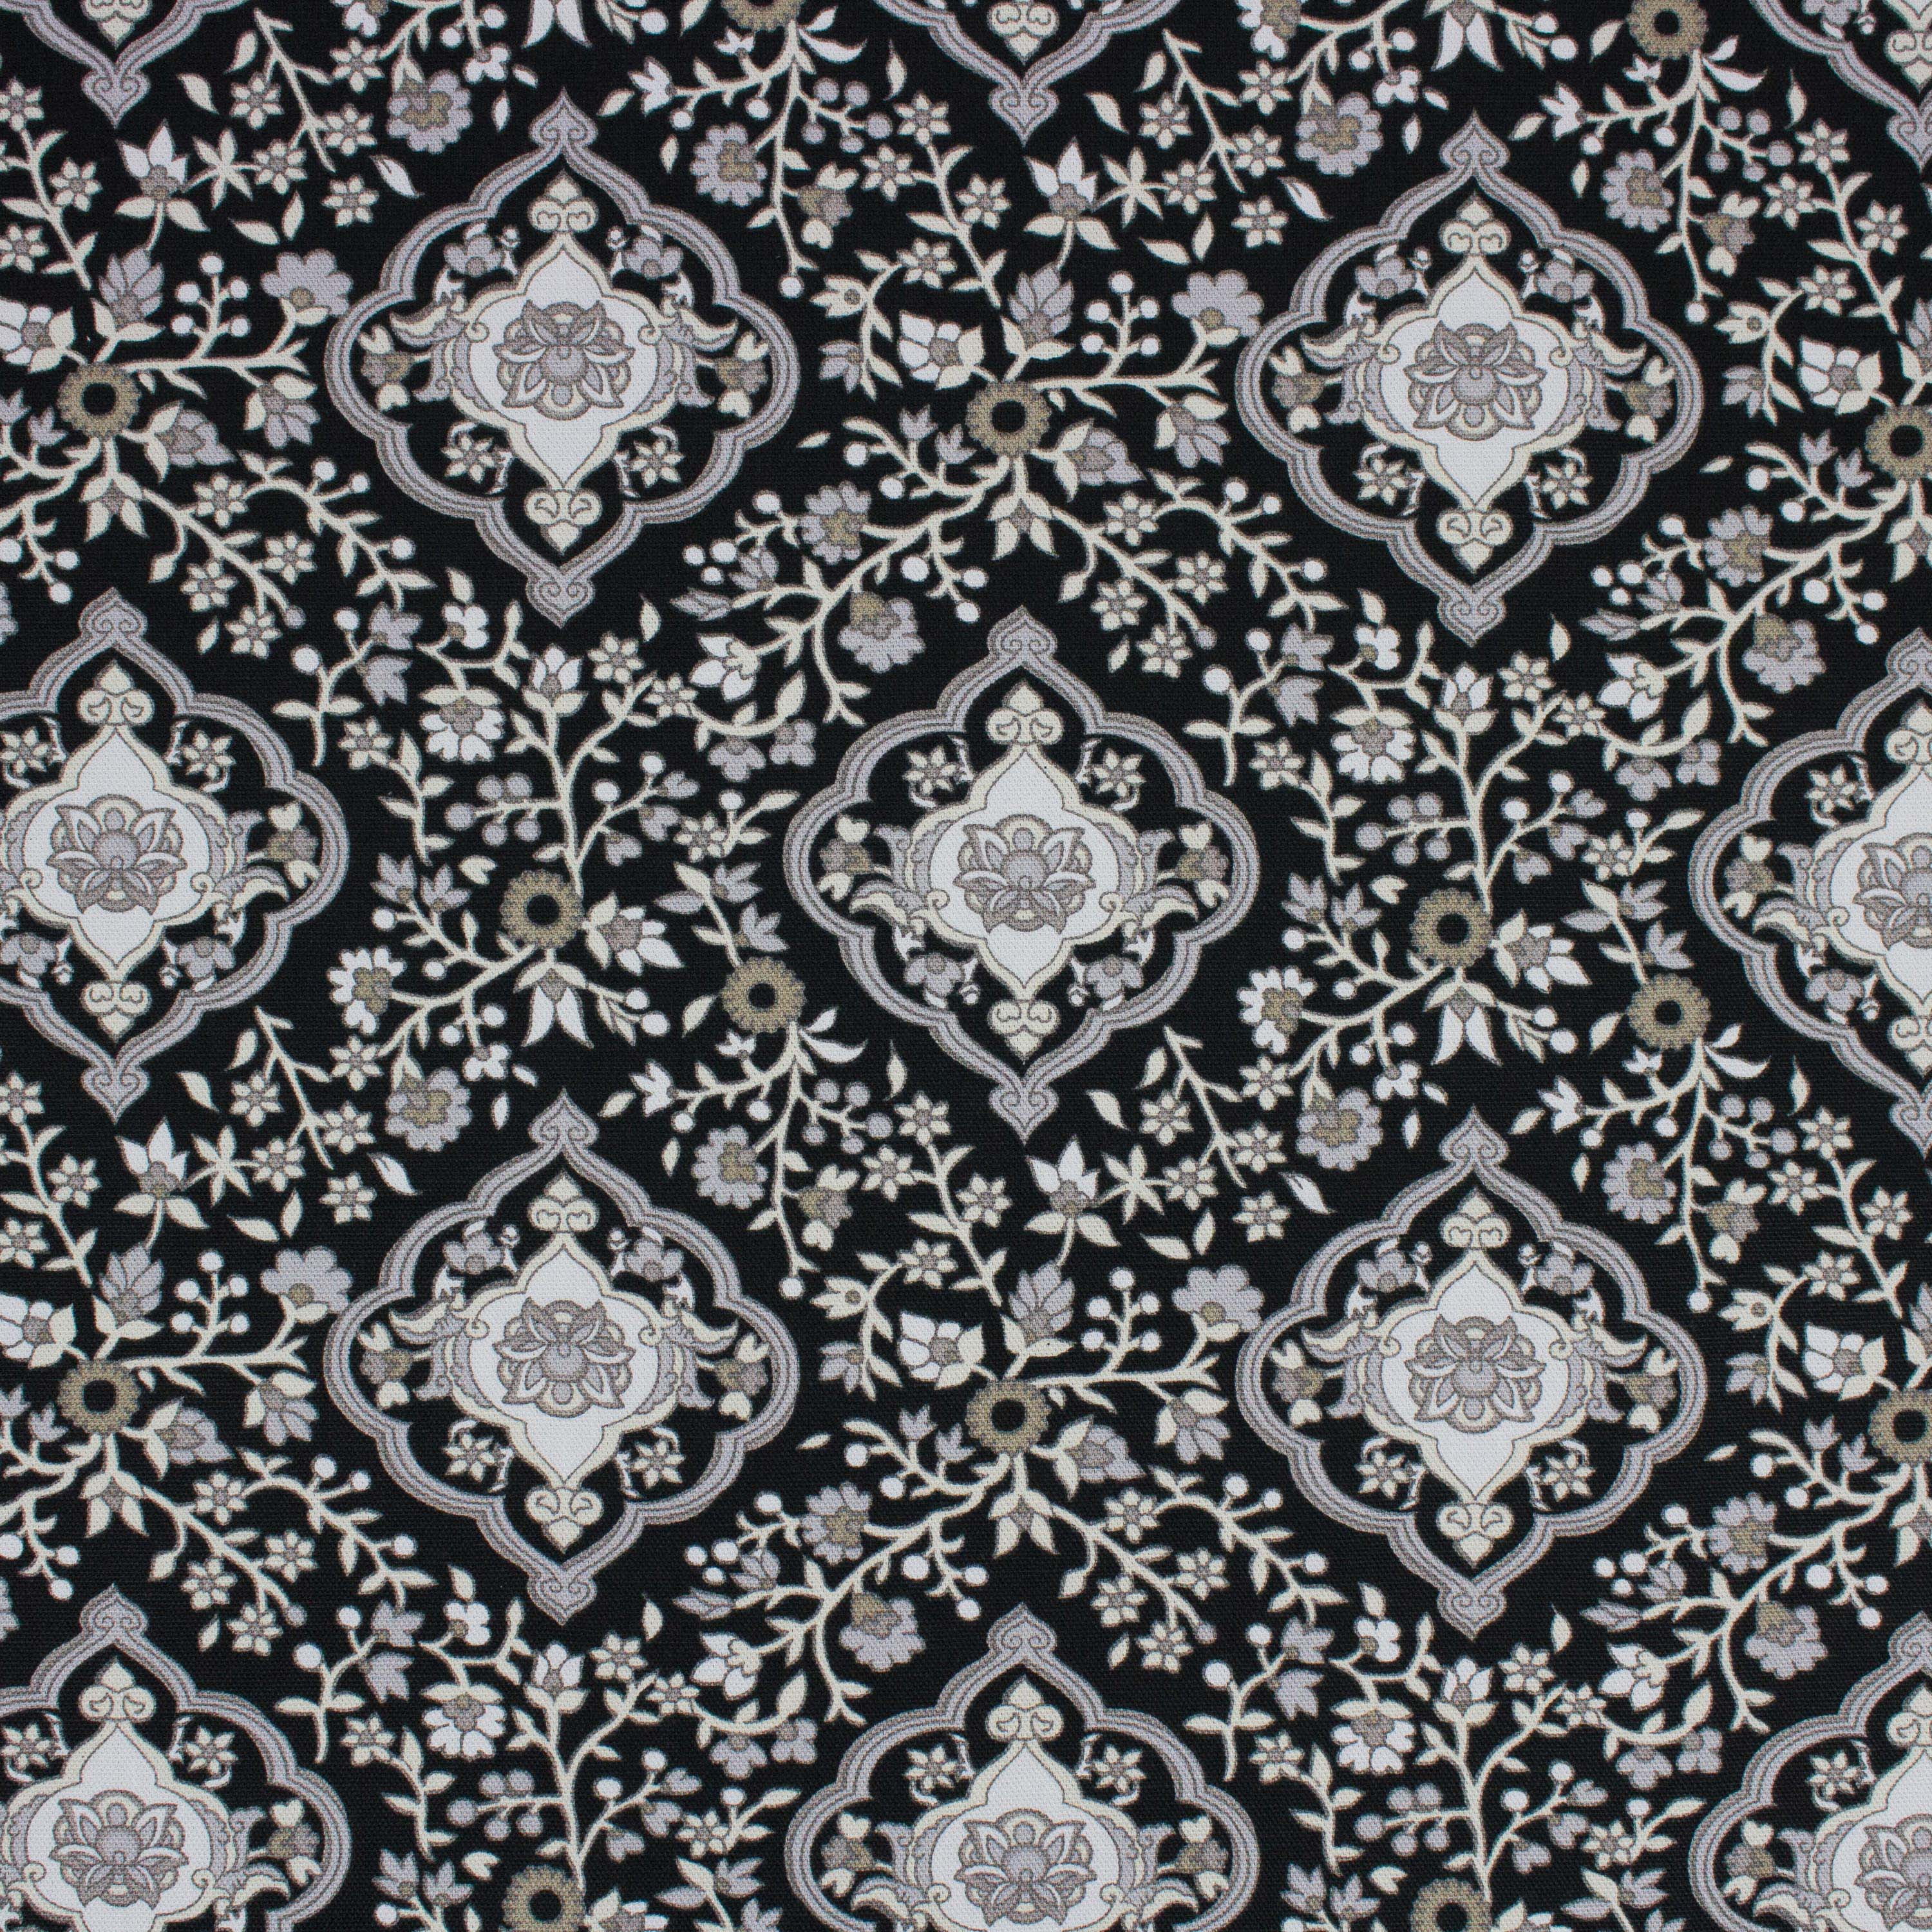 Black And White Linen Medallion Pattern Fabric By The Yard Medallion Cotton Black And White Cotton Black And White Medallion Fabric